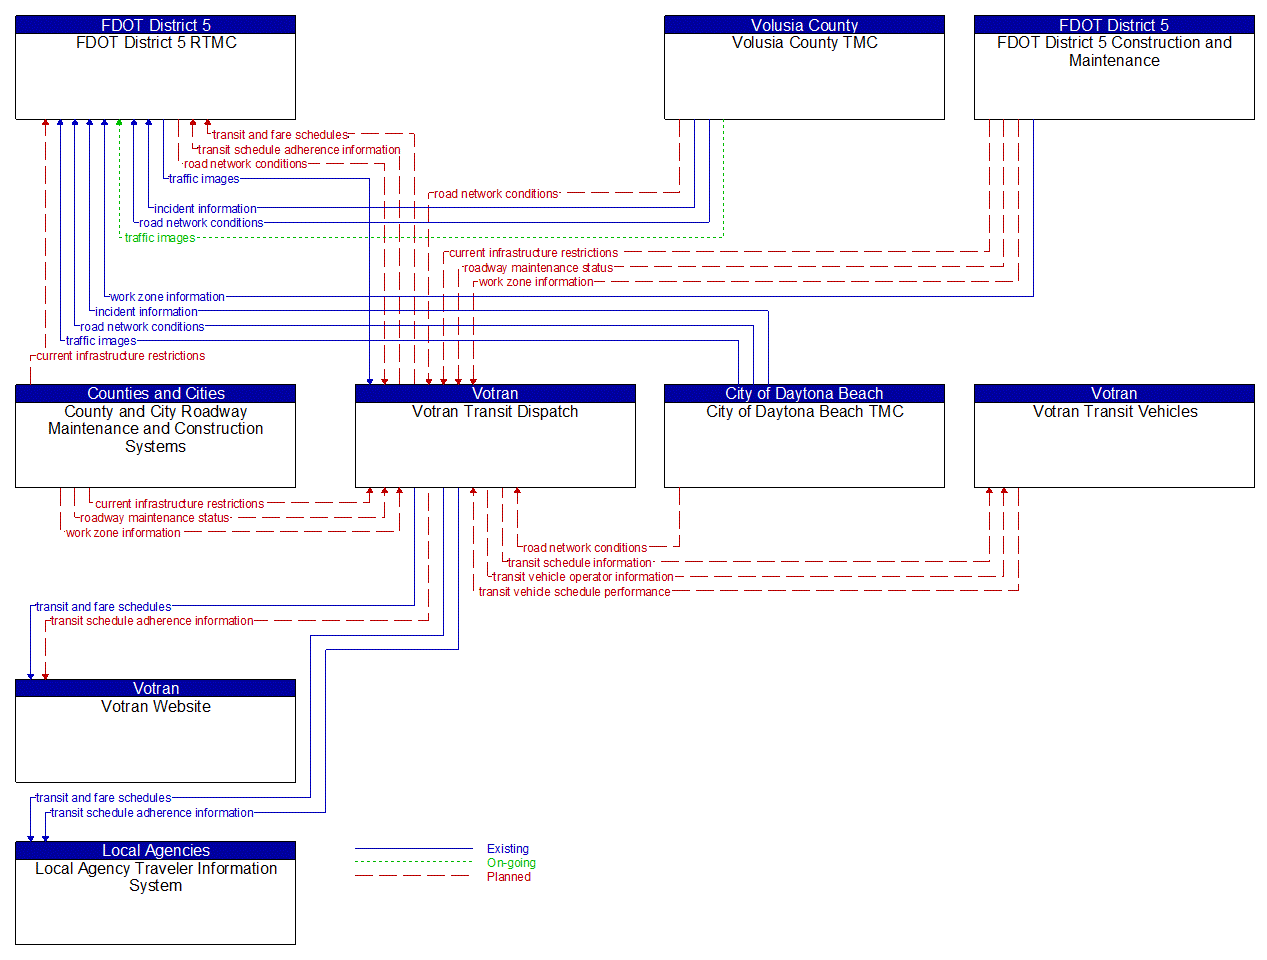 Service Graphic: Transit Fixed-Route Operations (Votran Transit Dispatch)